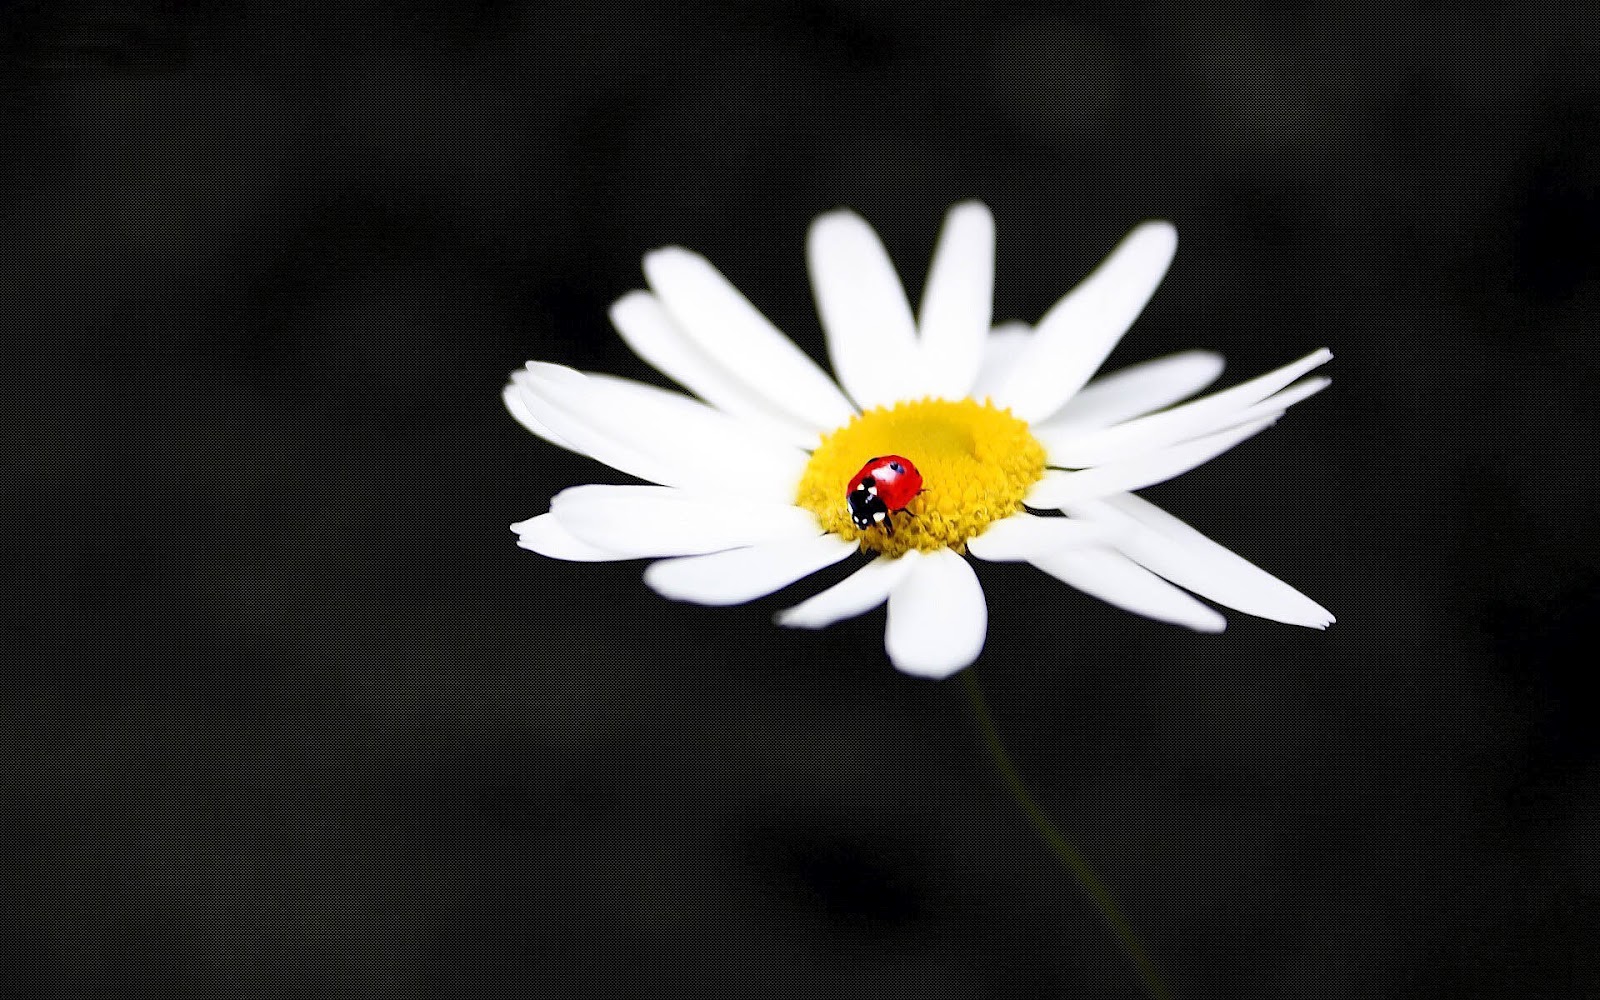 http://2.bp.blogspot.com/-KBmfma13rH4/UDe98N7OPgI/AAAAAAAABBc/G6dXzl90lbQ/s1600/hd-ladybug-wallpaper-with-a-ladybug-walking-on-a-white-flower-hd-ladybugs-wallpapers-backgrounds-pictures-photos.jpg